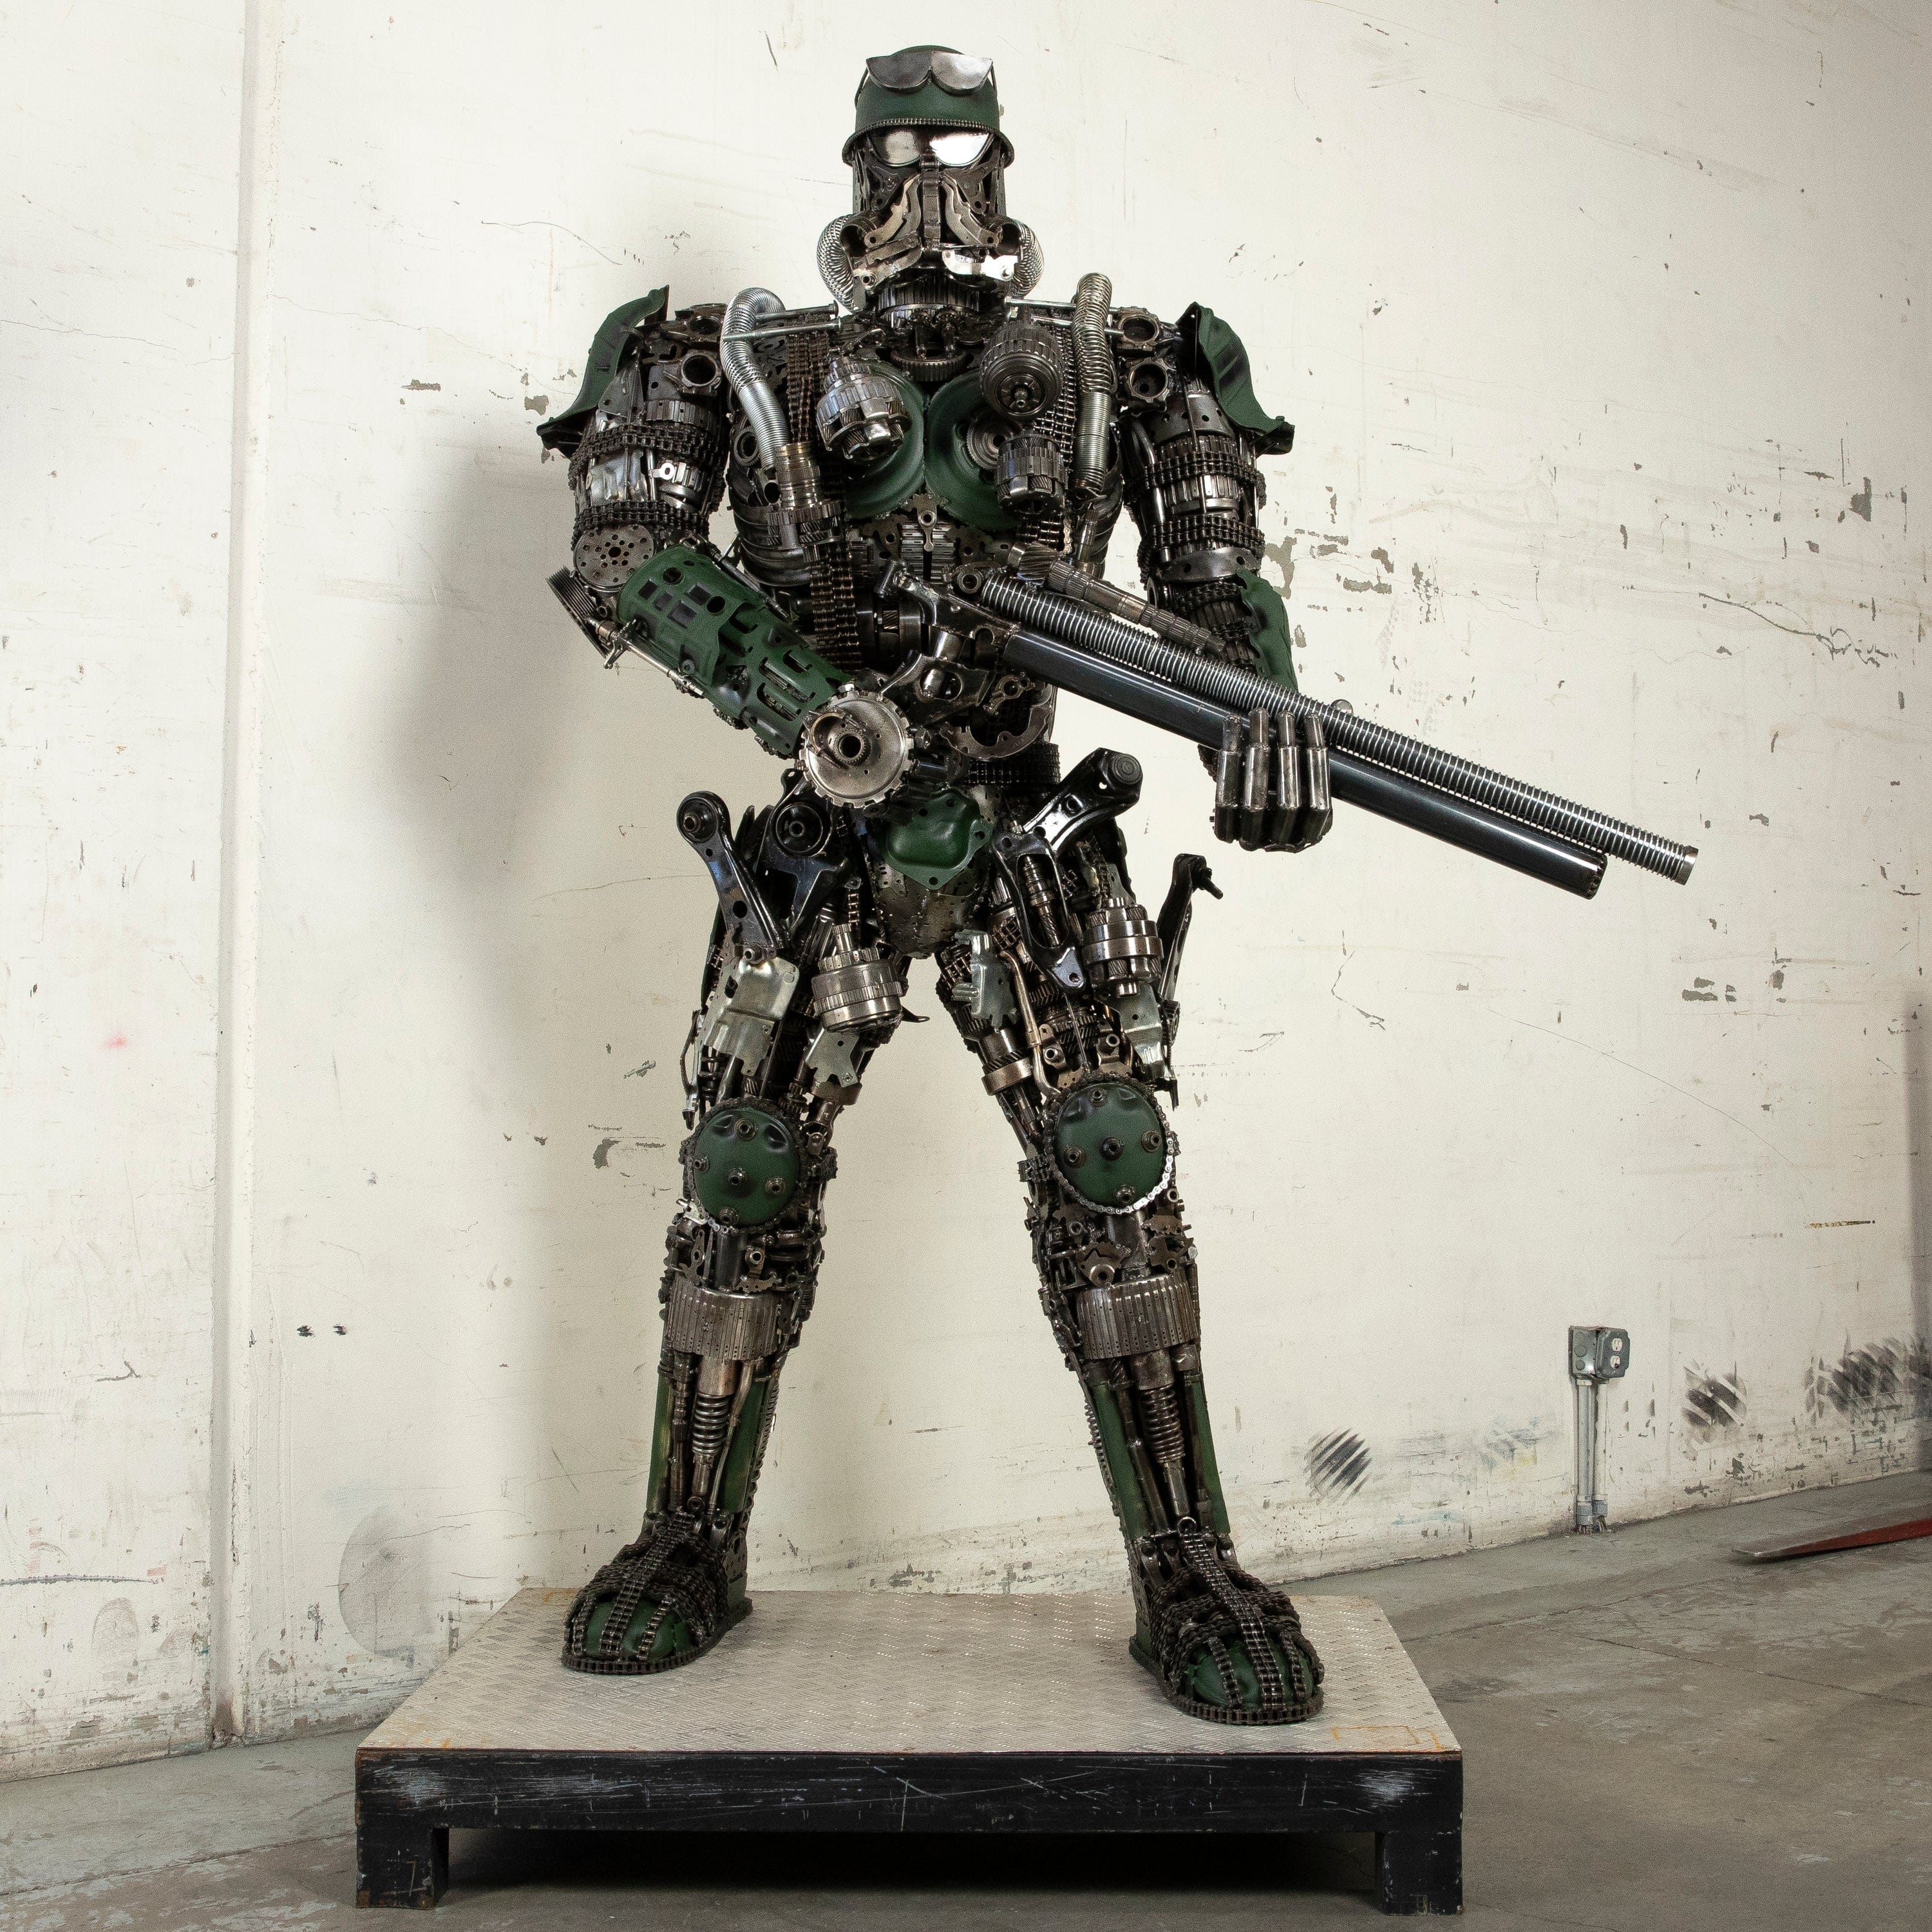 Kalifano Recycled Metal Art 91" Army Storm Trooper Inspired Recycled Metal Art Sculpture RMS-ST230-S08